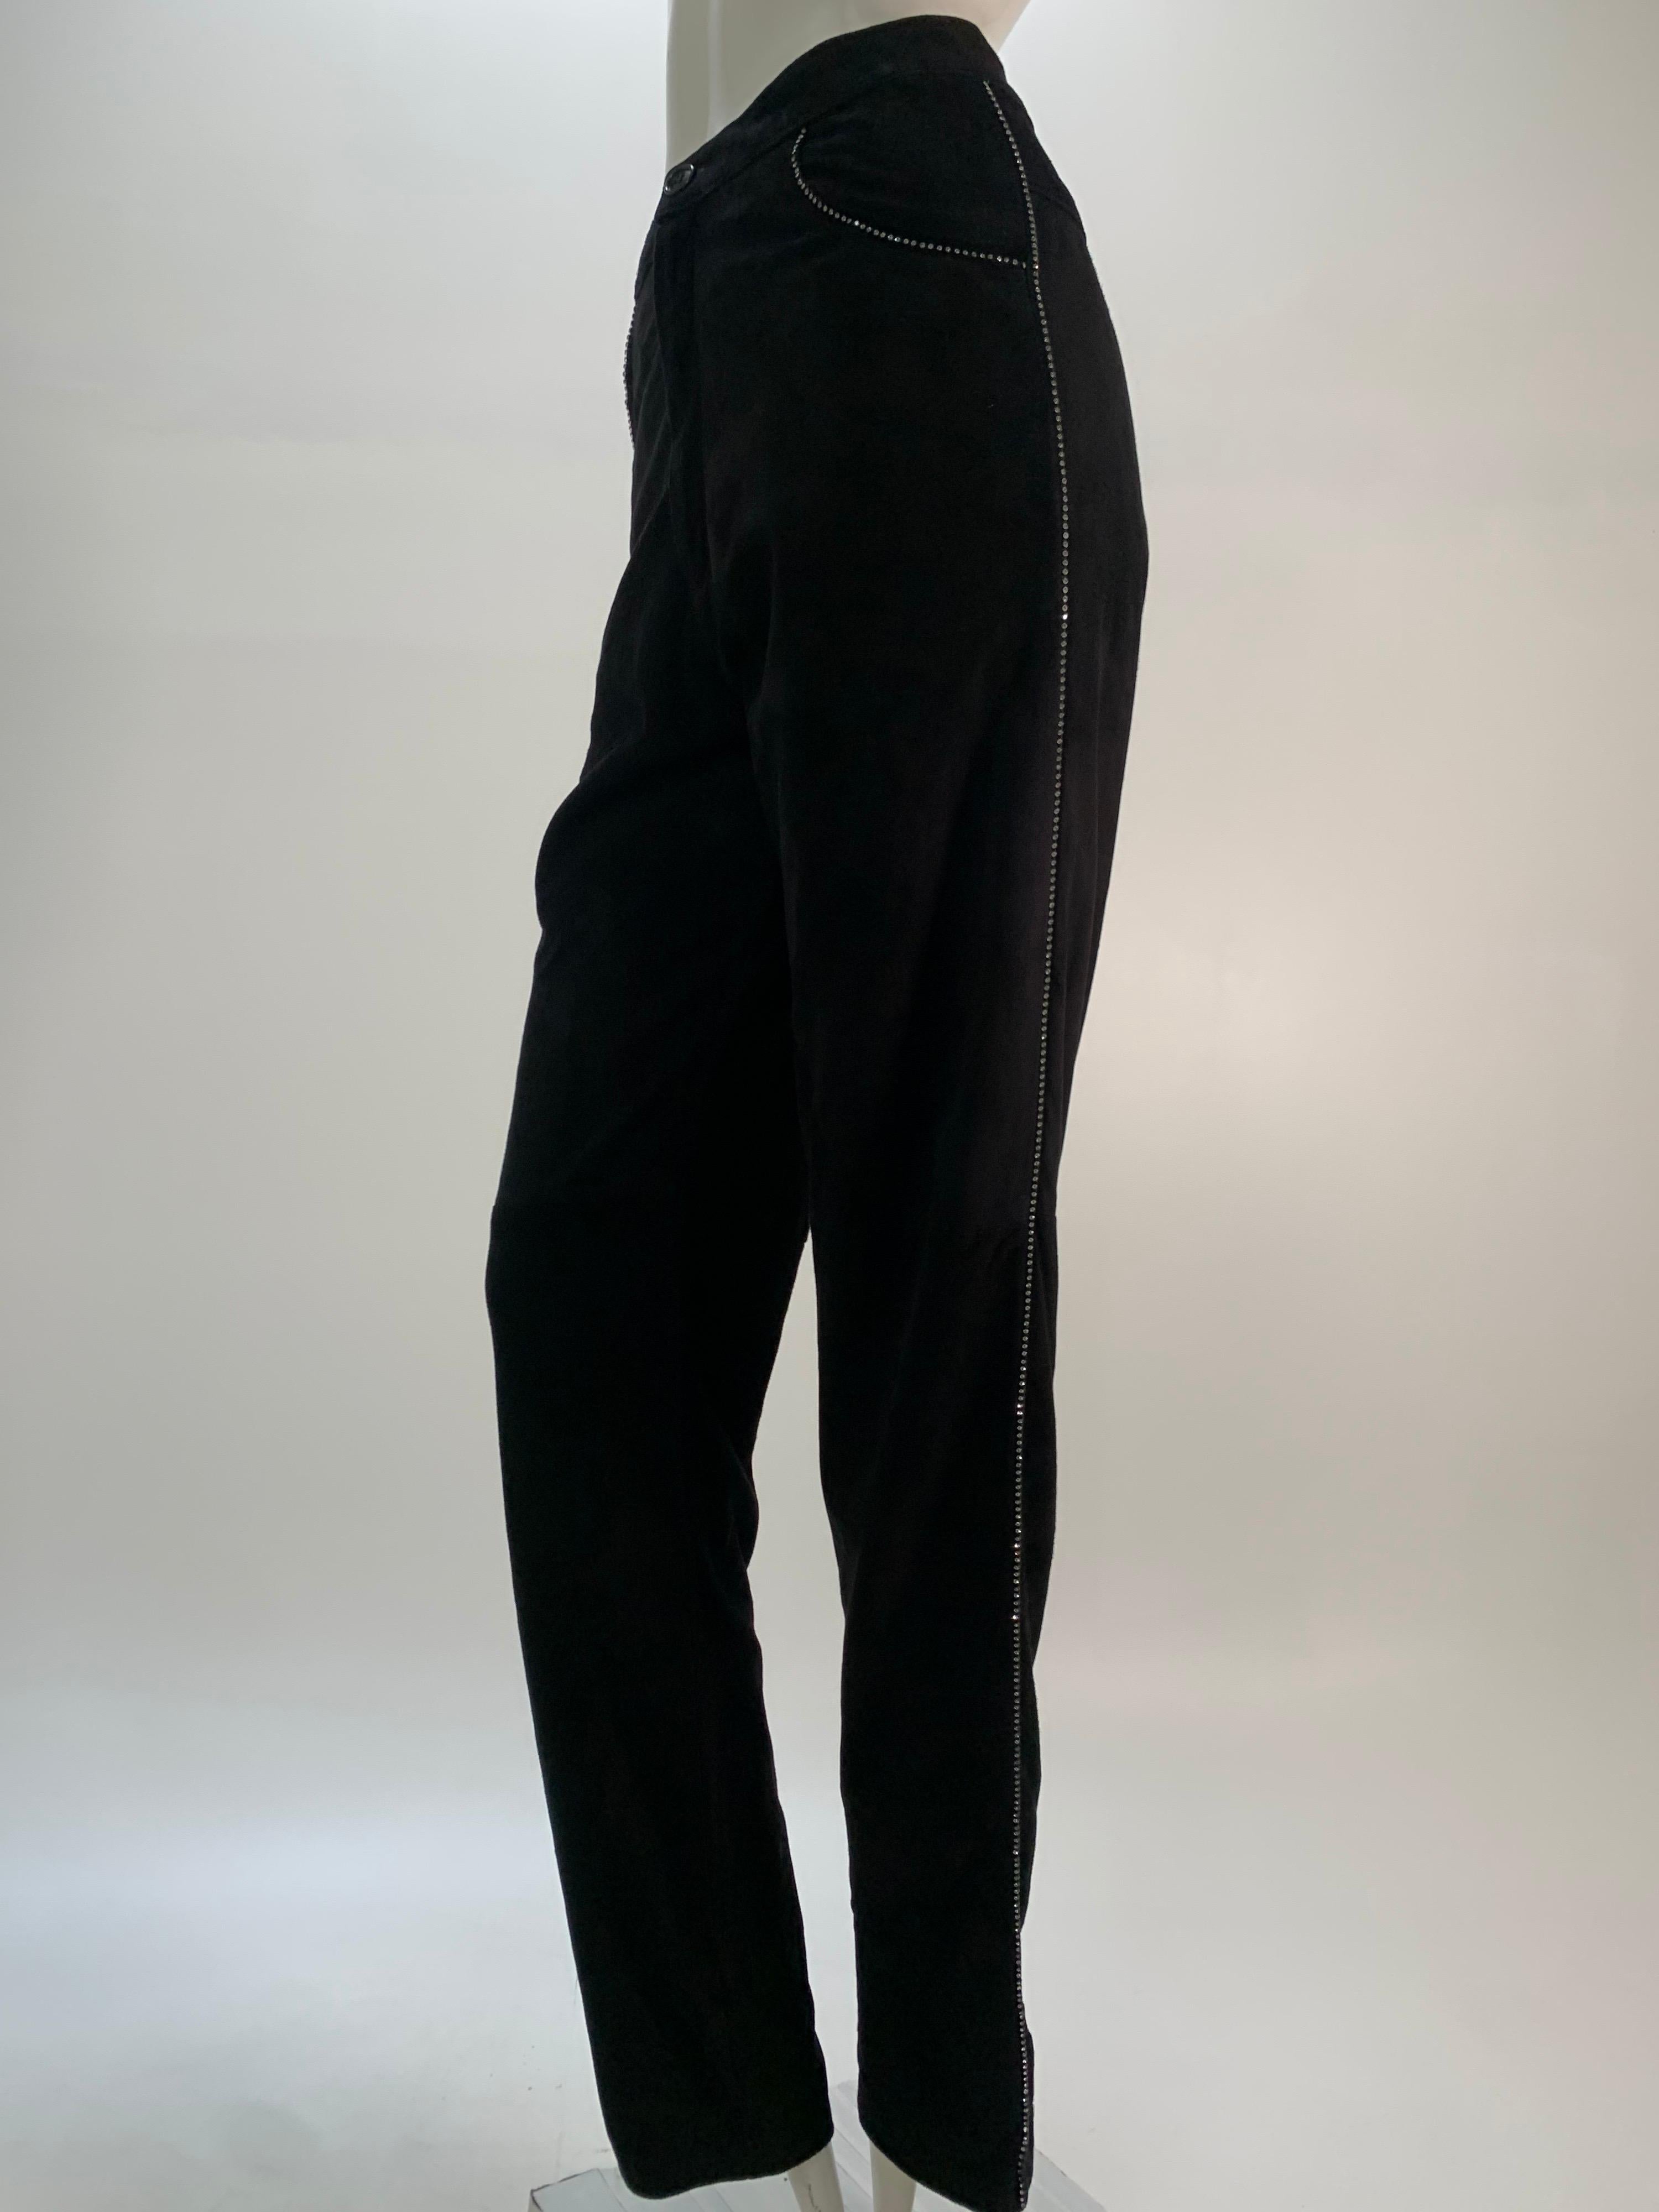 1980s Robert Elliot fine black suede pant in a relaxed cut with small rhinestones edging the outer leg seam and pocket. Lined. 